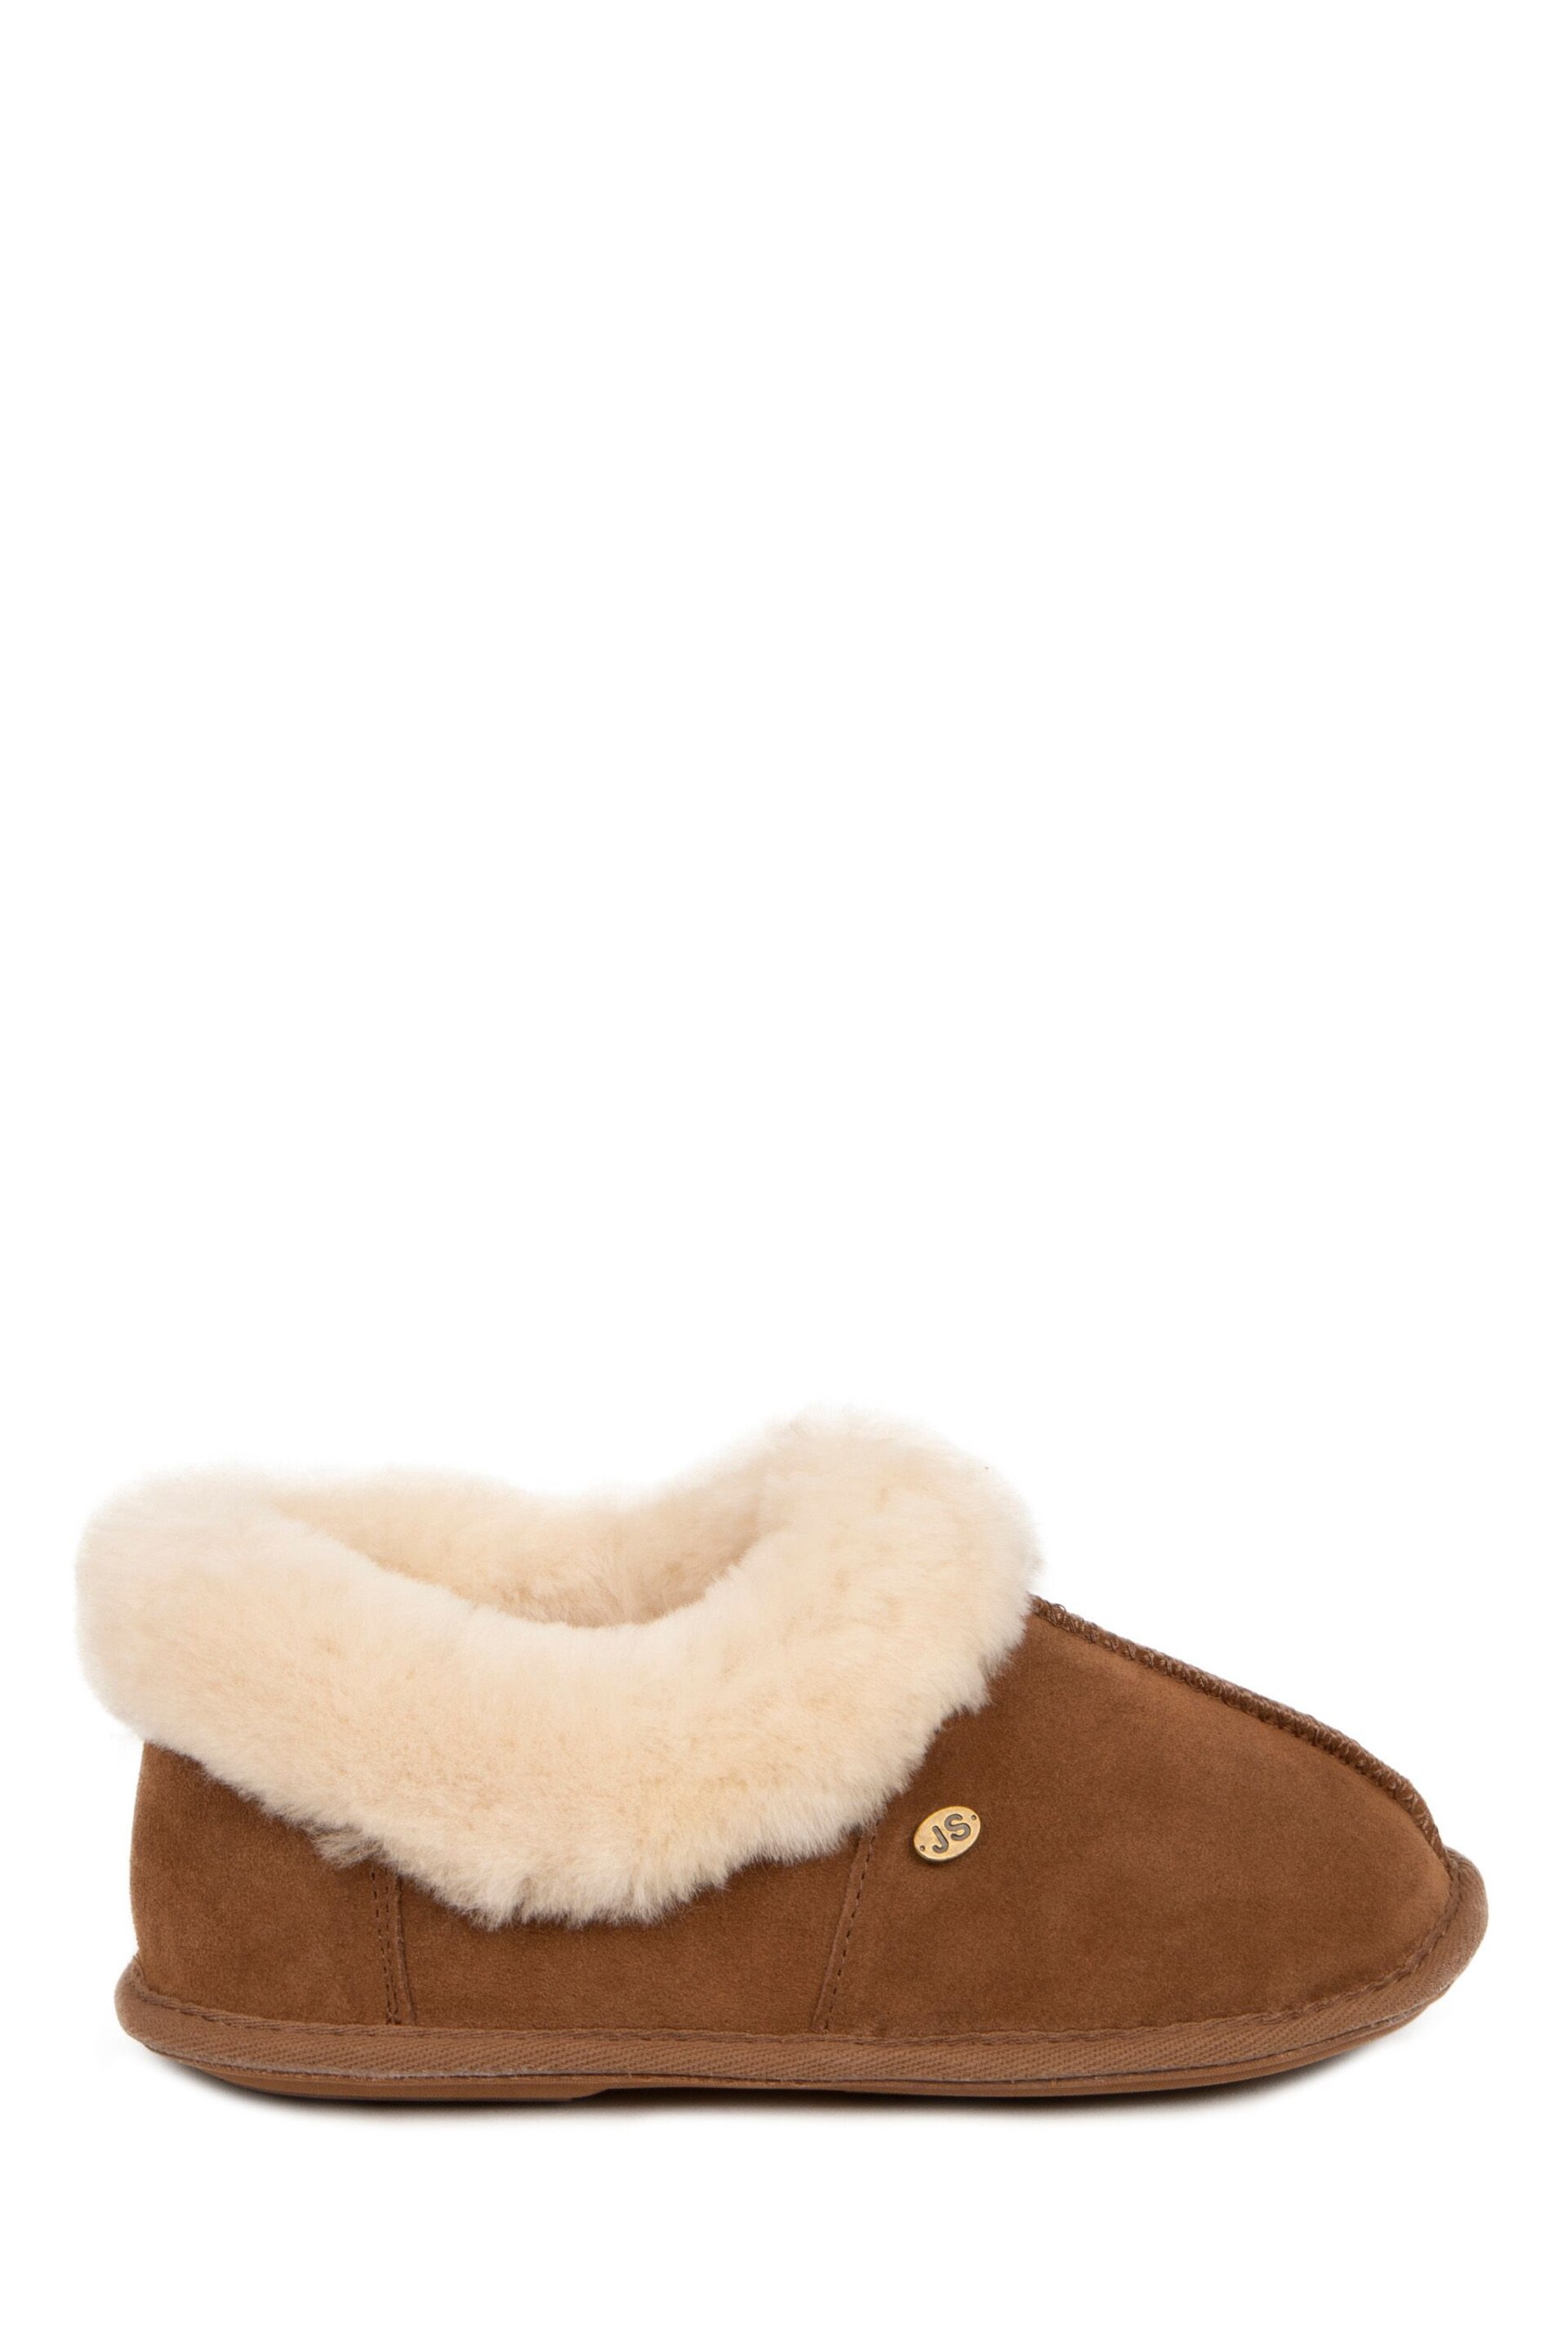 Just Sheepskin Brown Ladies Classic Slippers - Image 2 of 5